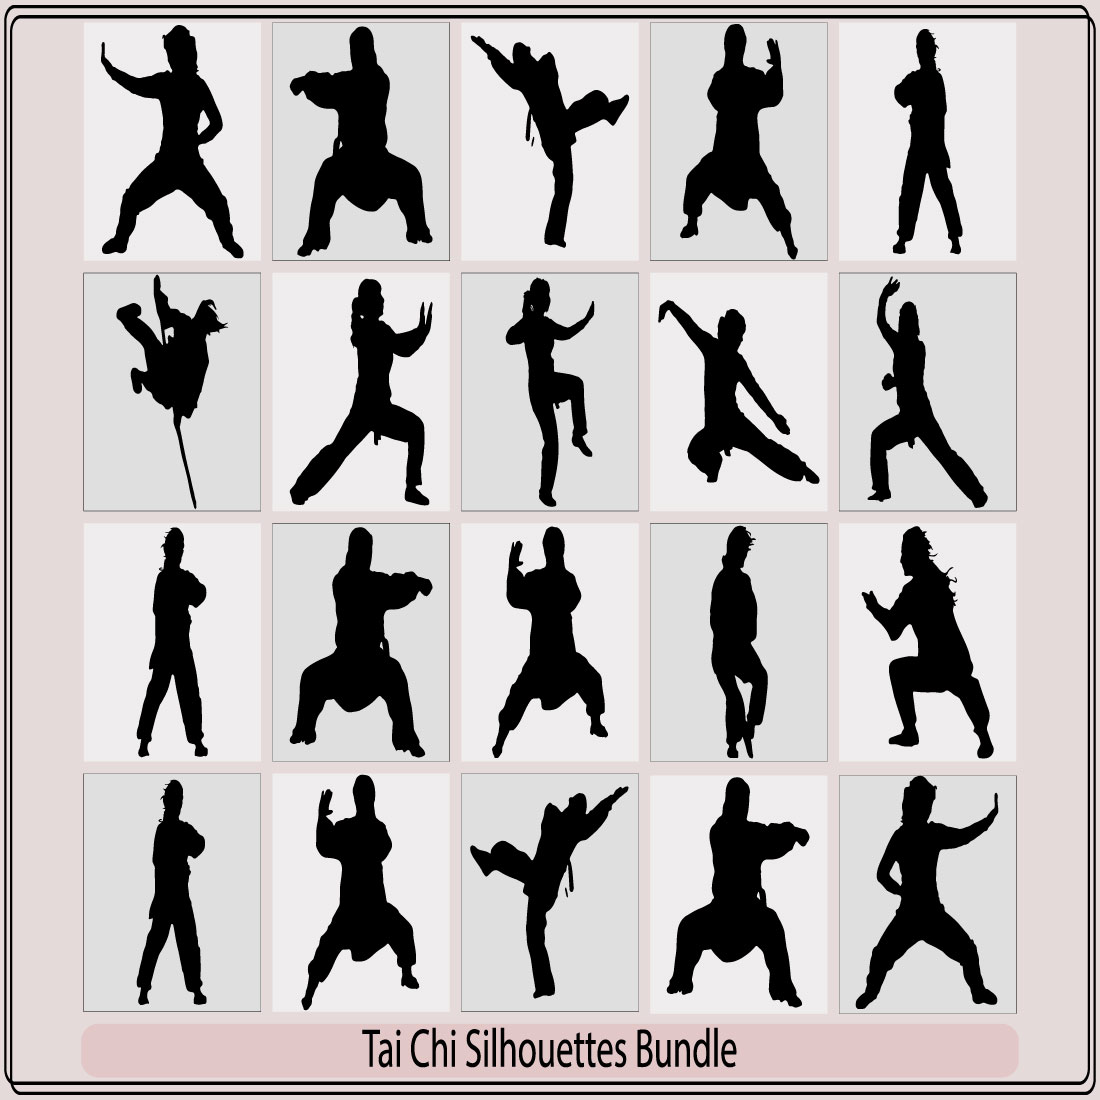 silhouettes of people practicing Tai Chi,Martial Art Kung Fu Tai Chi Self Defense Exercise Fight Master People Man,Tai Chi Chuan man silhouette vector cover image.